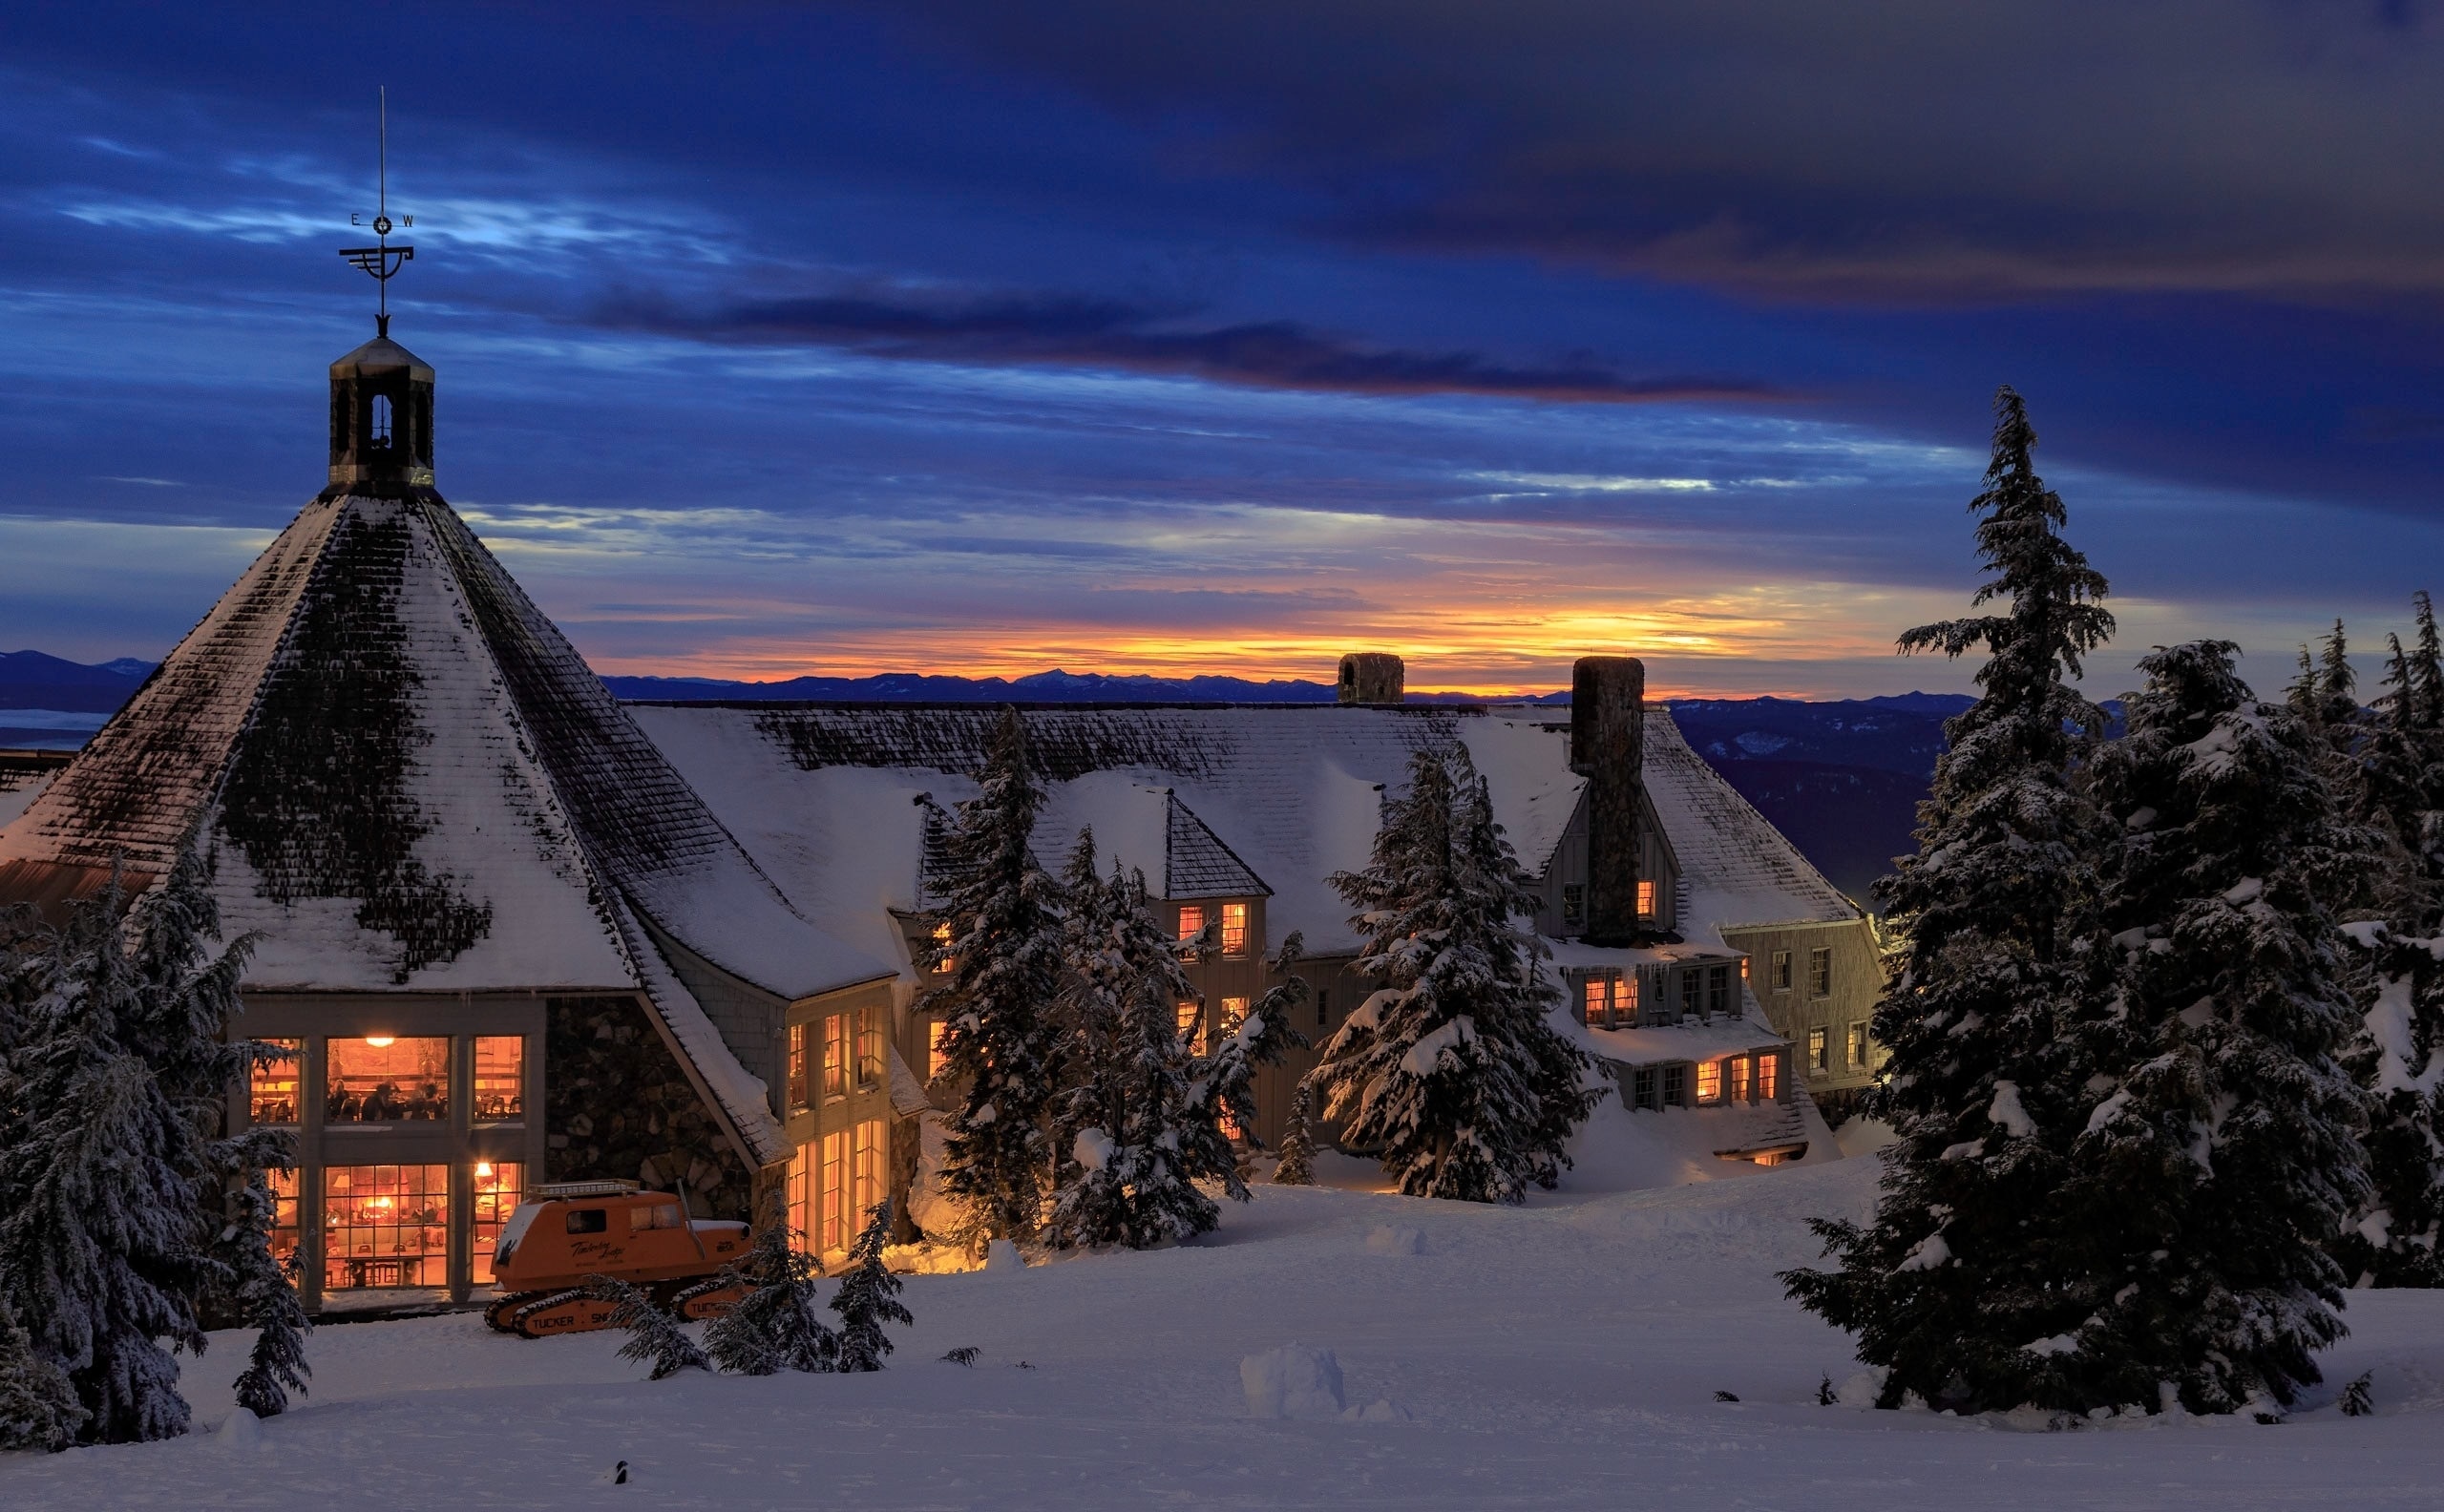 Vacation Homes near Timberline Lodge Ski Area, Government Camp